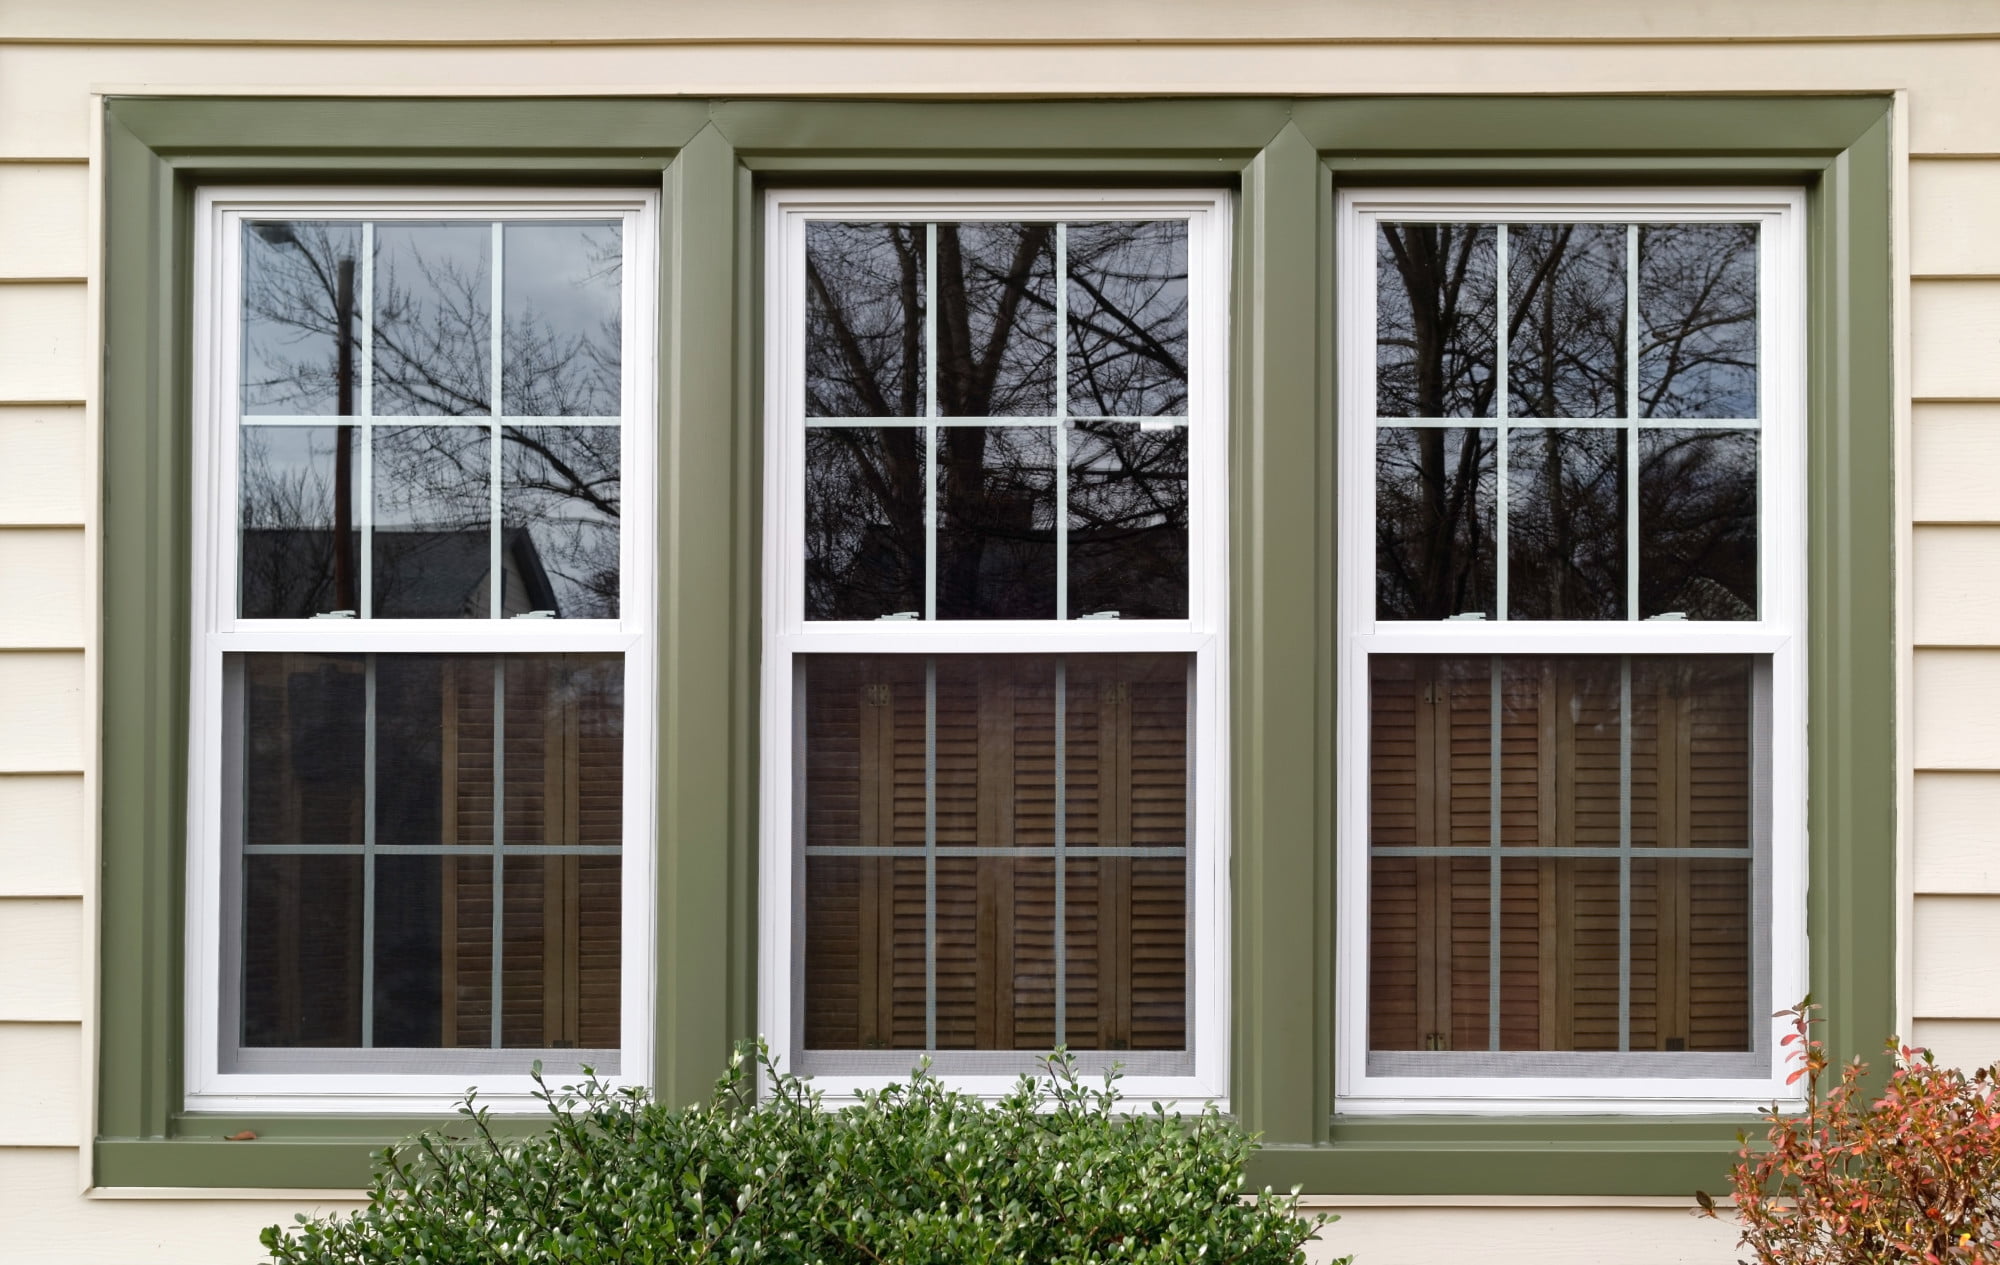 Choosing the right windows for your home doesn't have to be challenging. Keep reading to learn how to find the best windows.